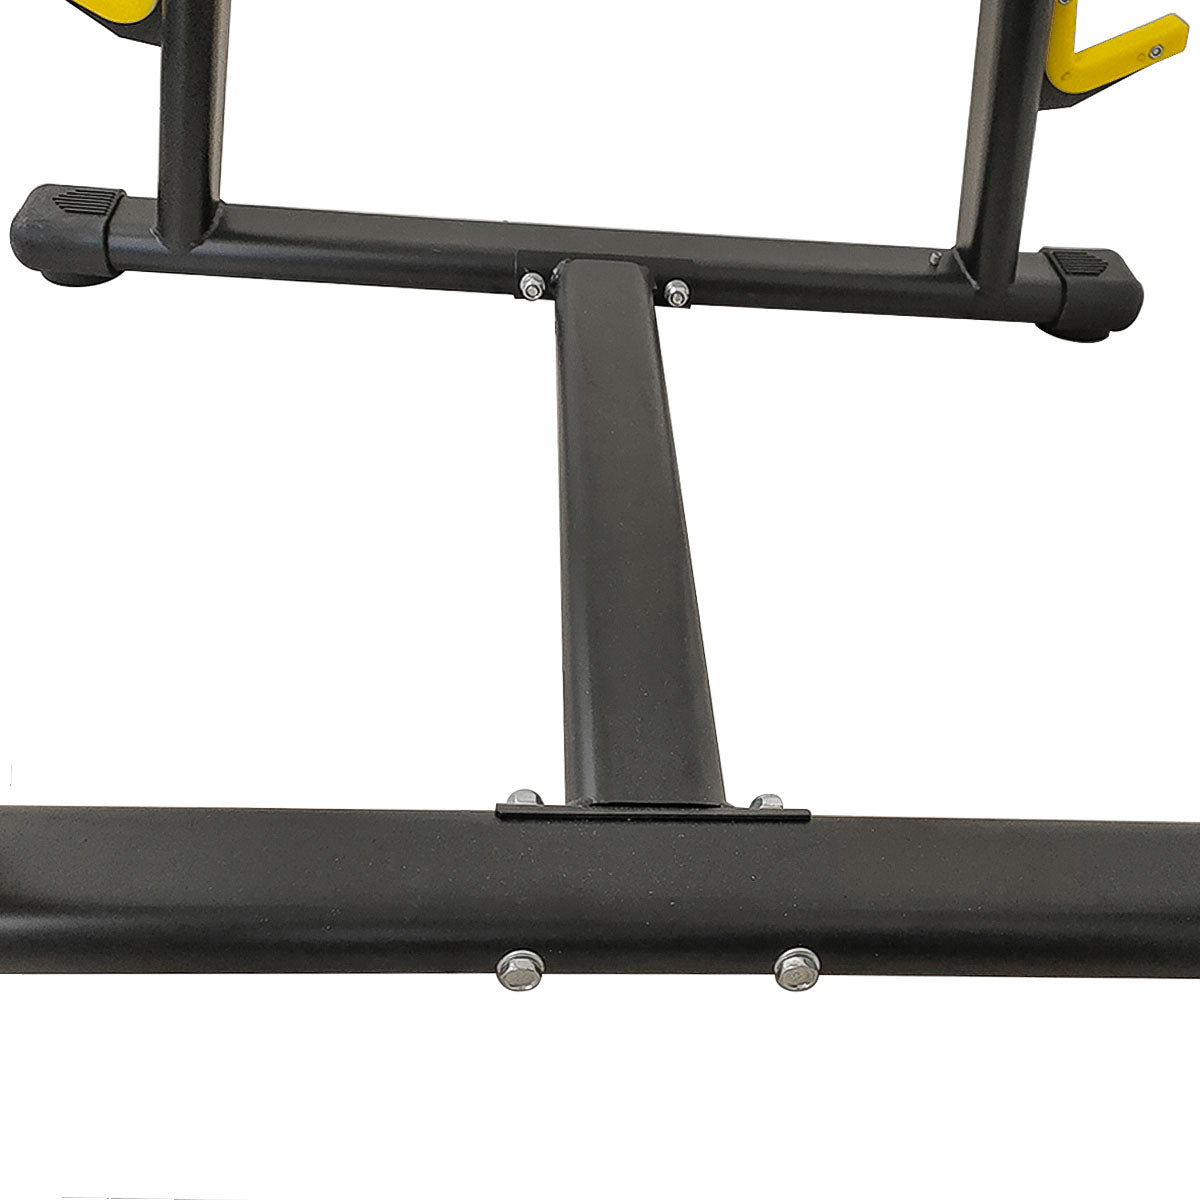 Fixed Barbell Double Sided Storage Rack frame